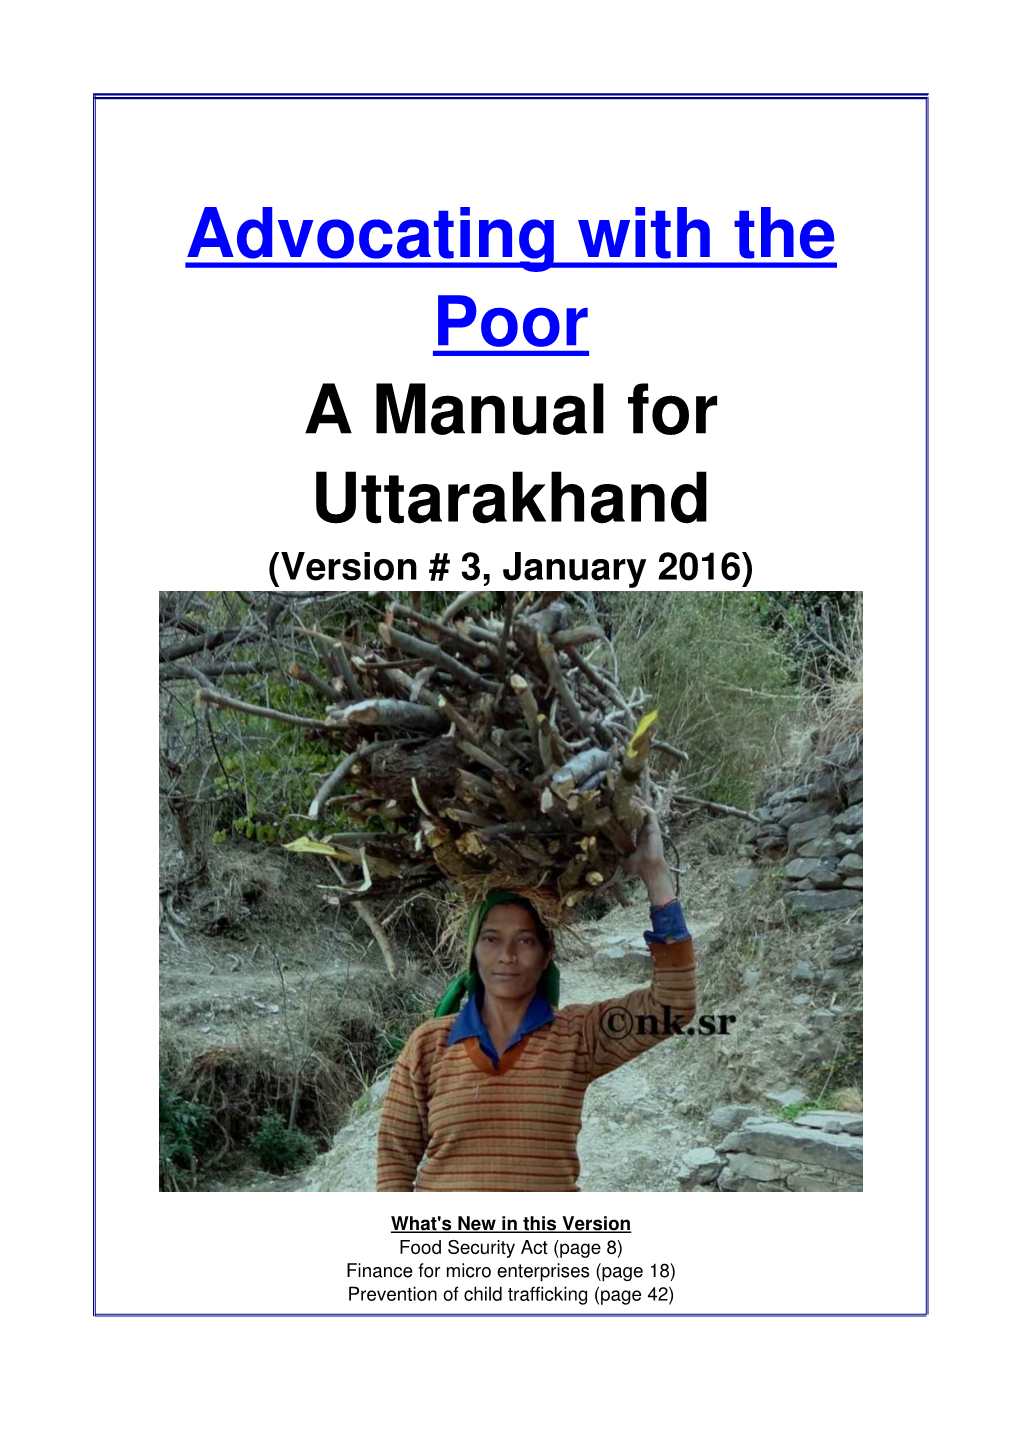 Advocating with the Poor a Manual for Uttarakhand (Version # 3, January 2016)